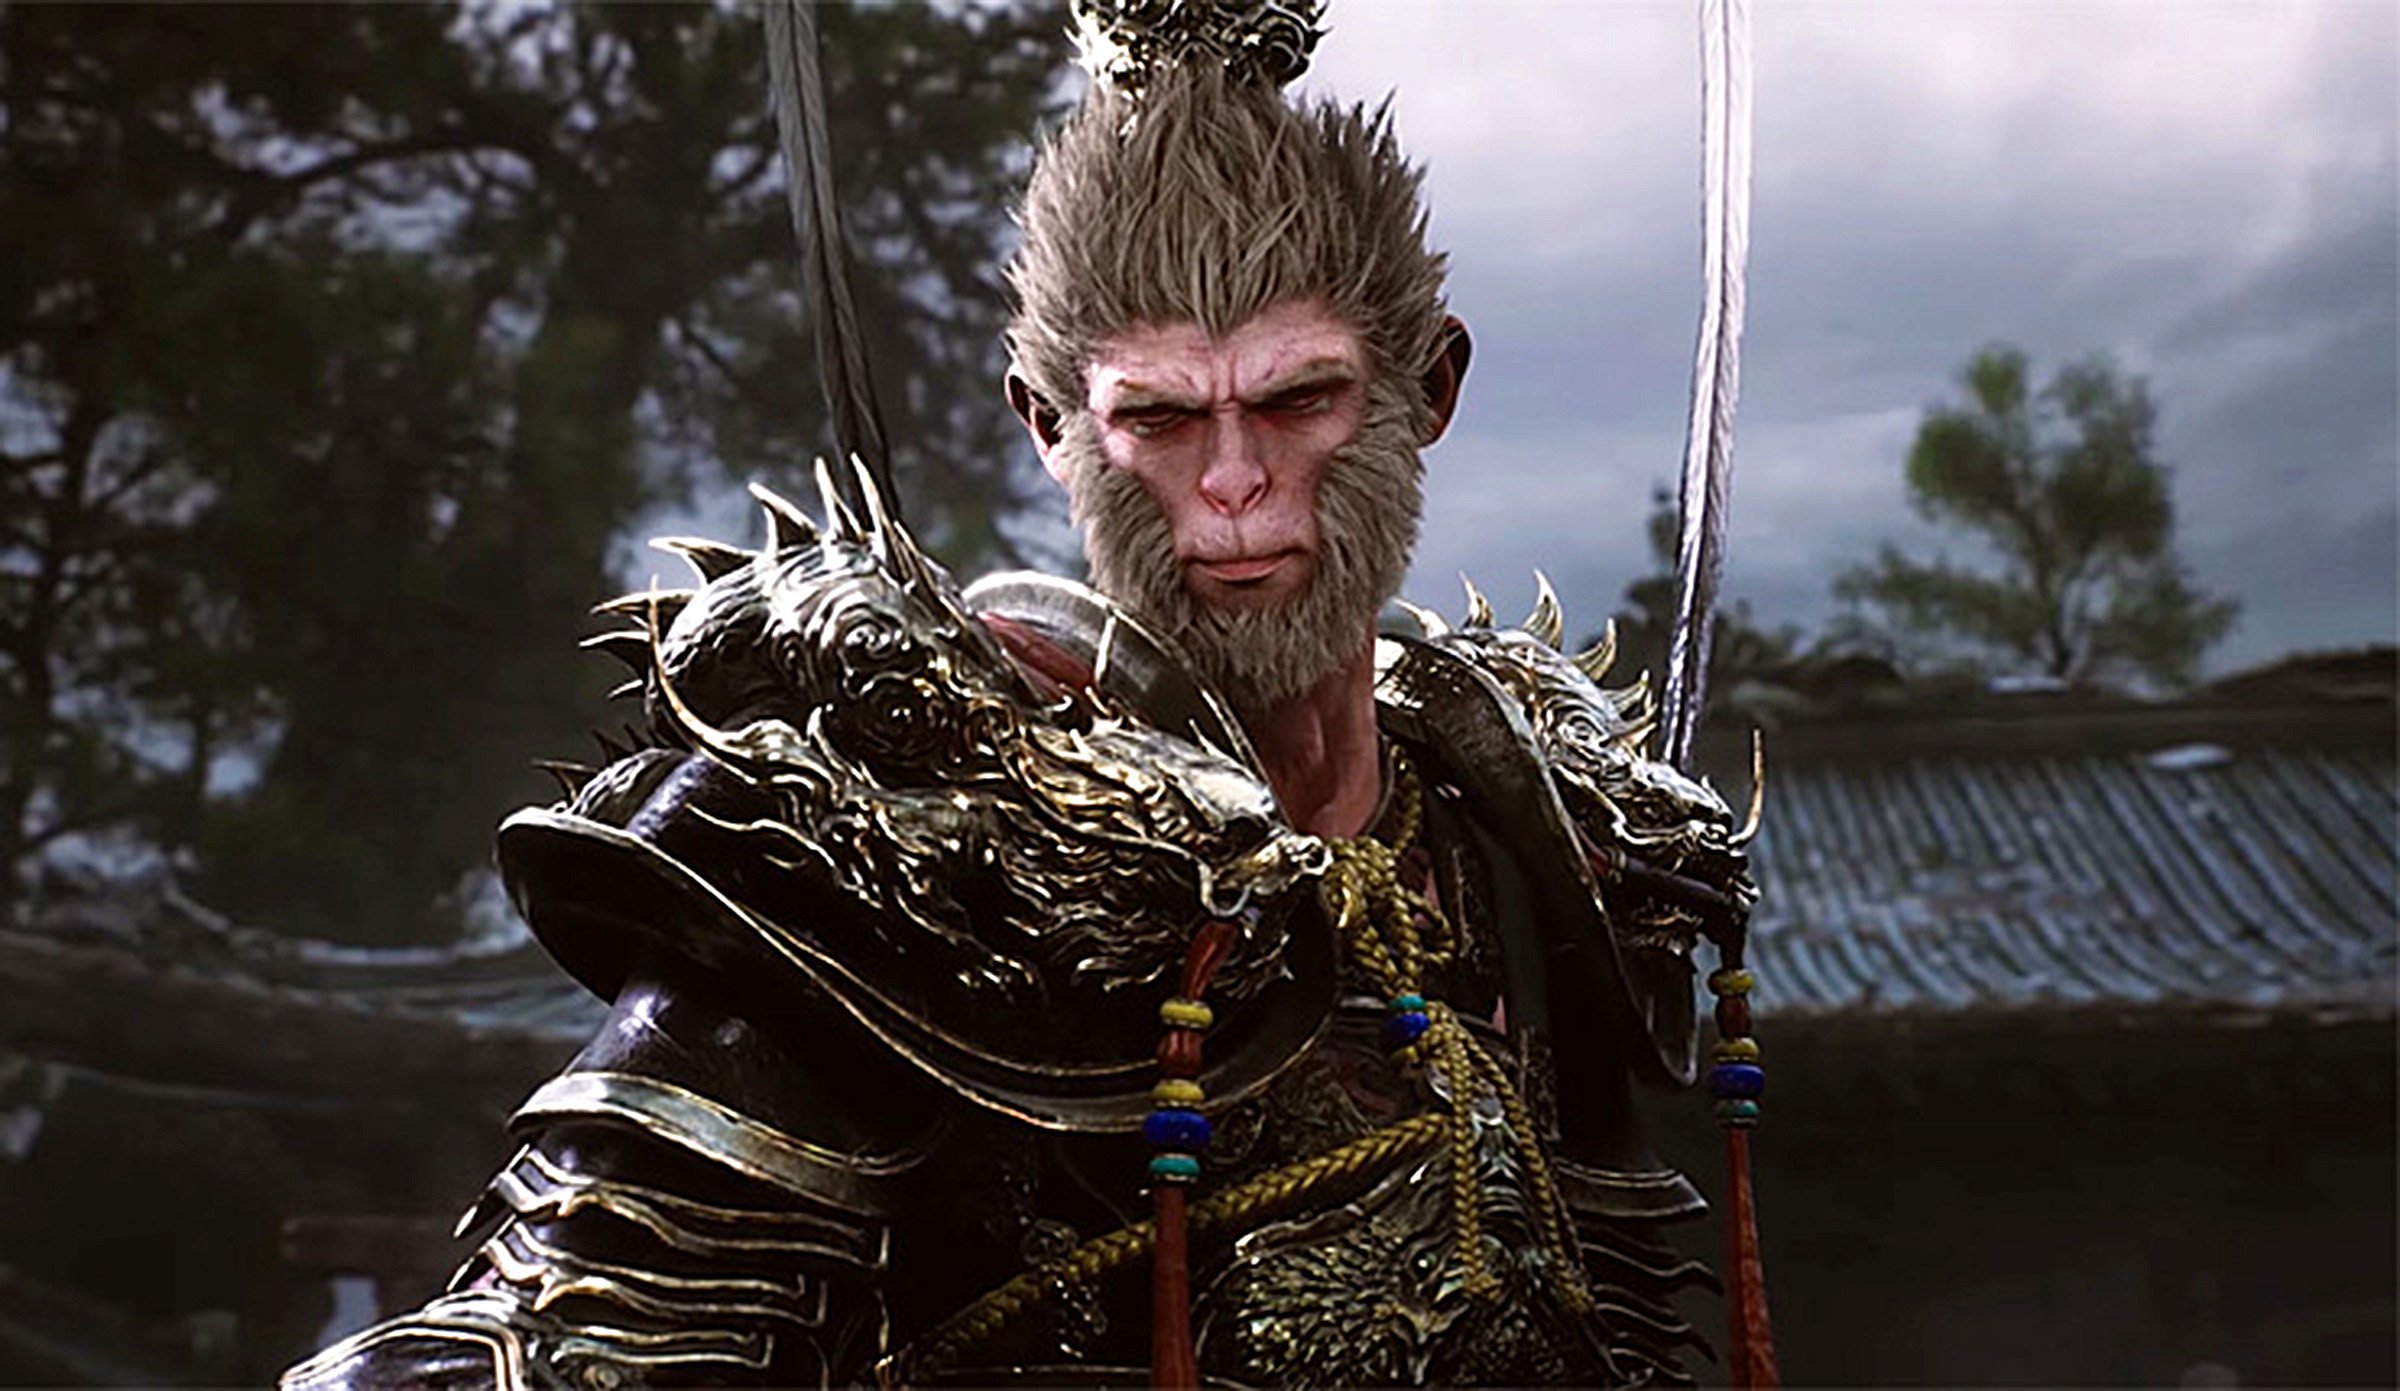 Black Myth Wukong is an action role-playing game based on the classic Chinese novel Journey to the West published in the 16th century. Photo: Game Science